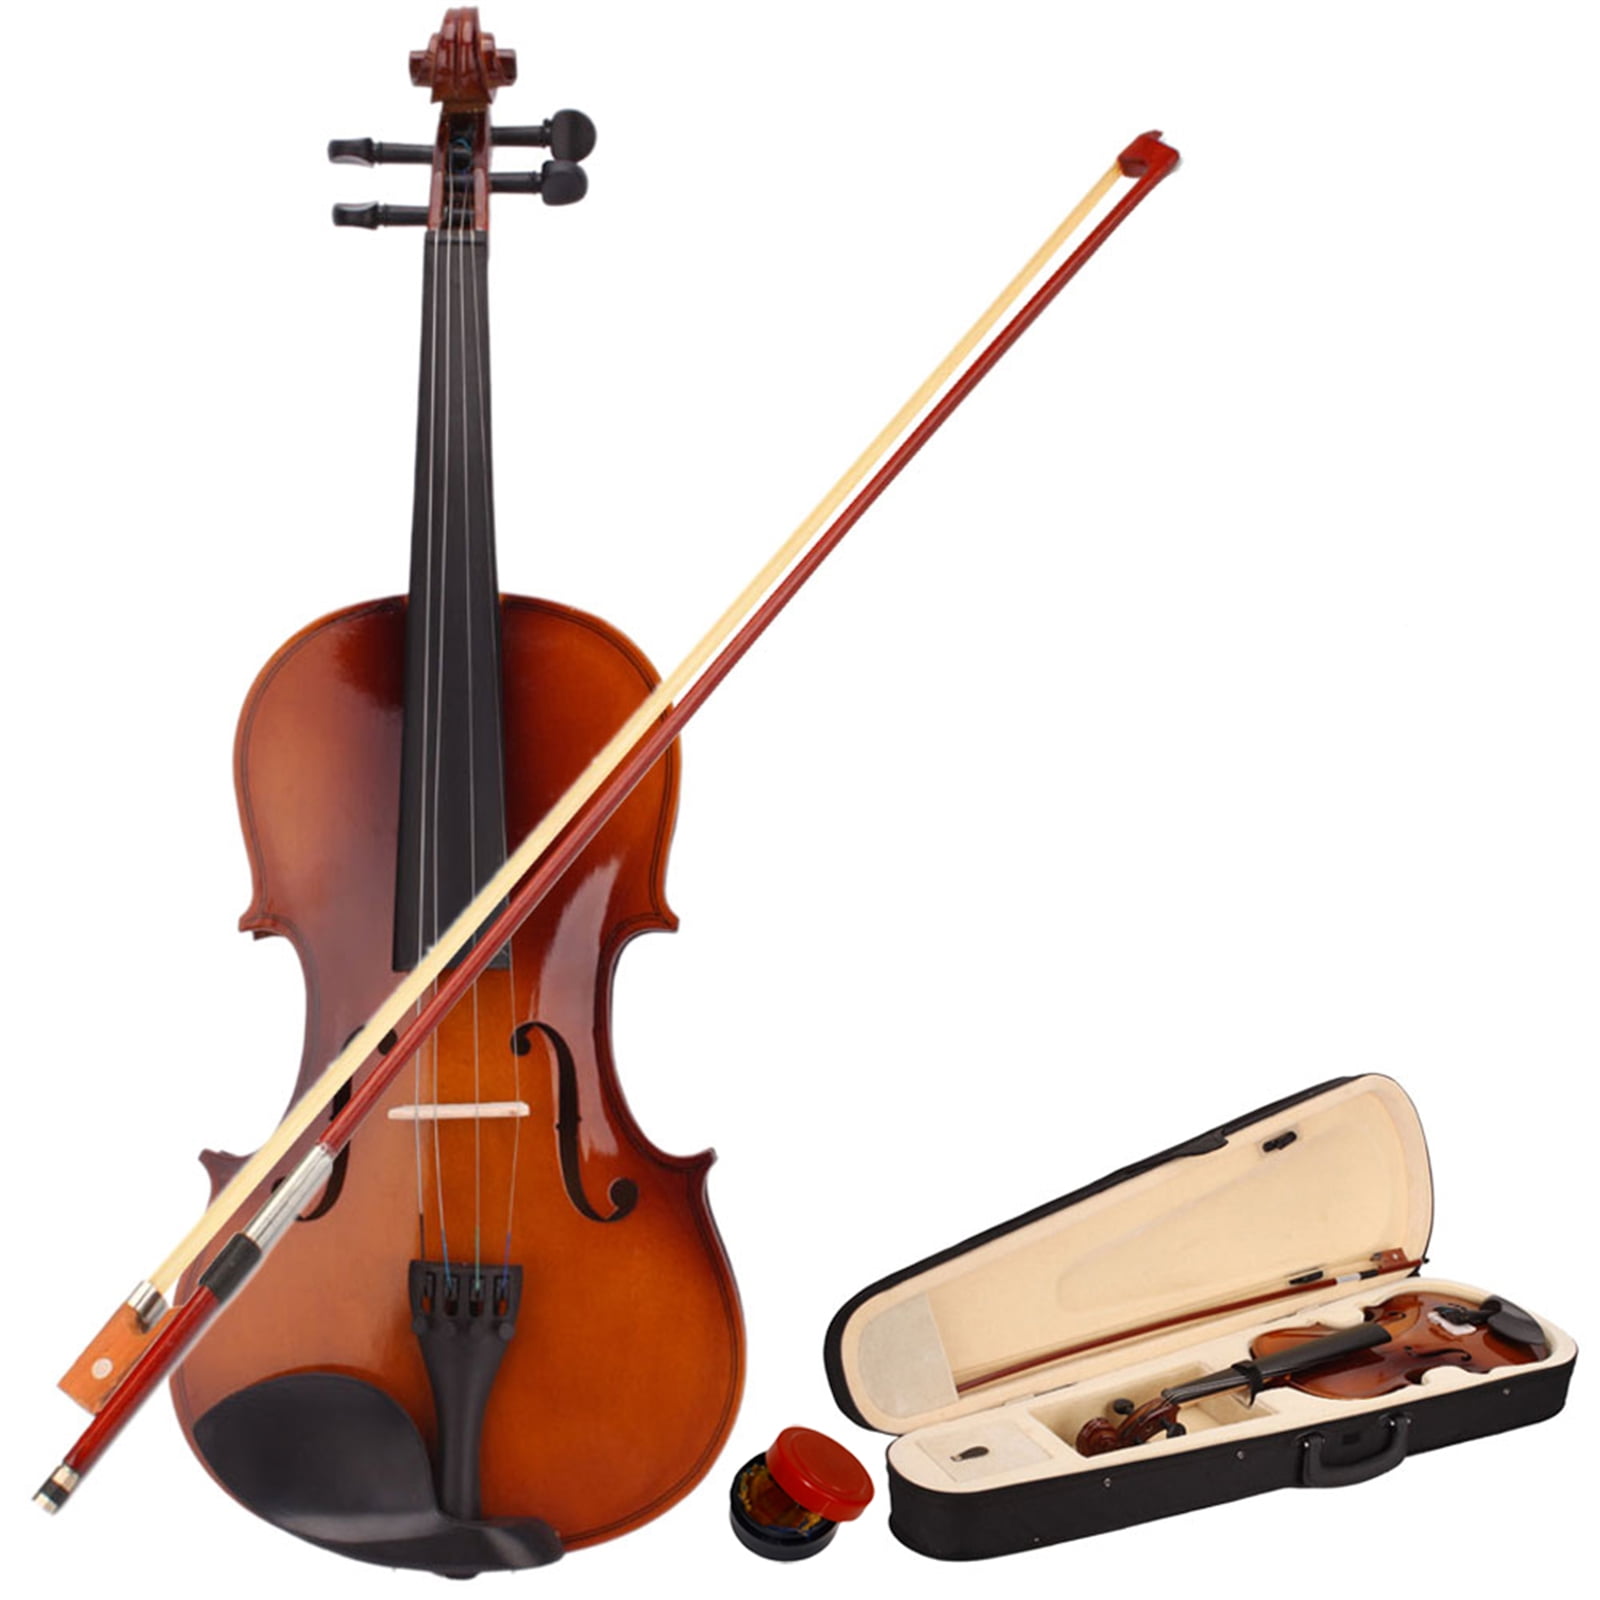 1/2 Shoulder Rest Paititi Artist-100 Student Violin Starter Kit with Brazilwood Bow Lightweight Case Extra Strings Rosin and Fingerchart 